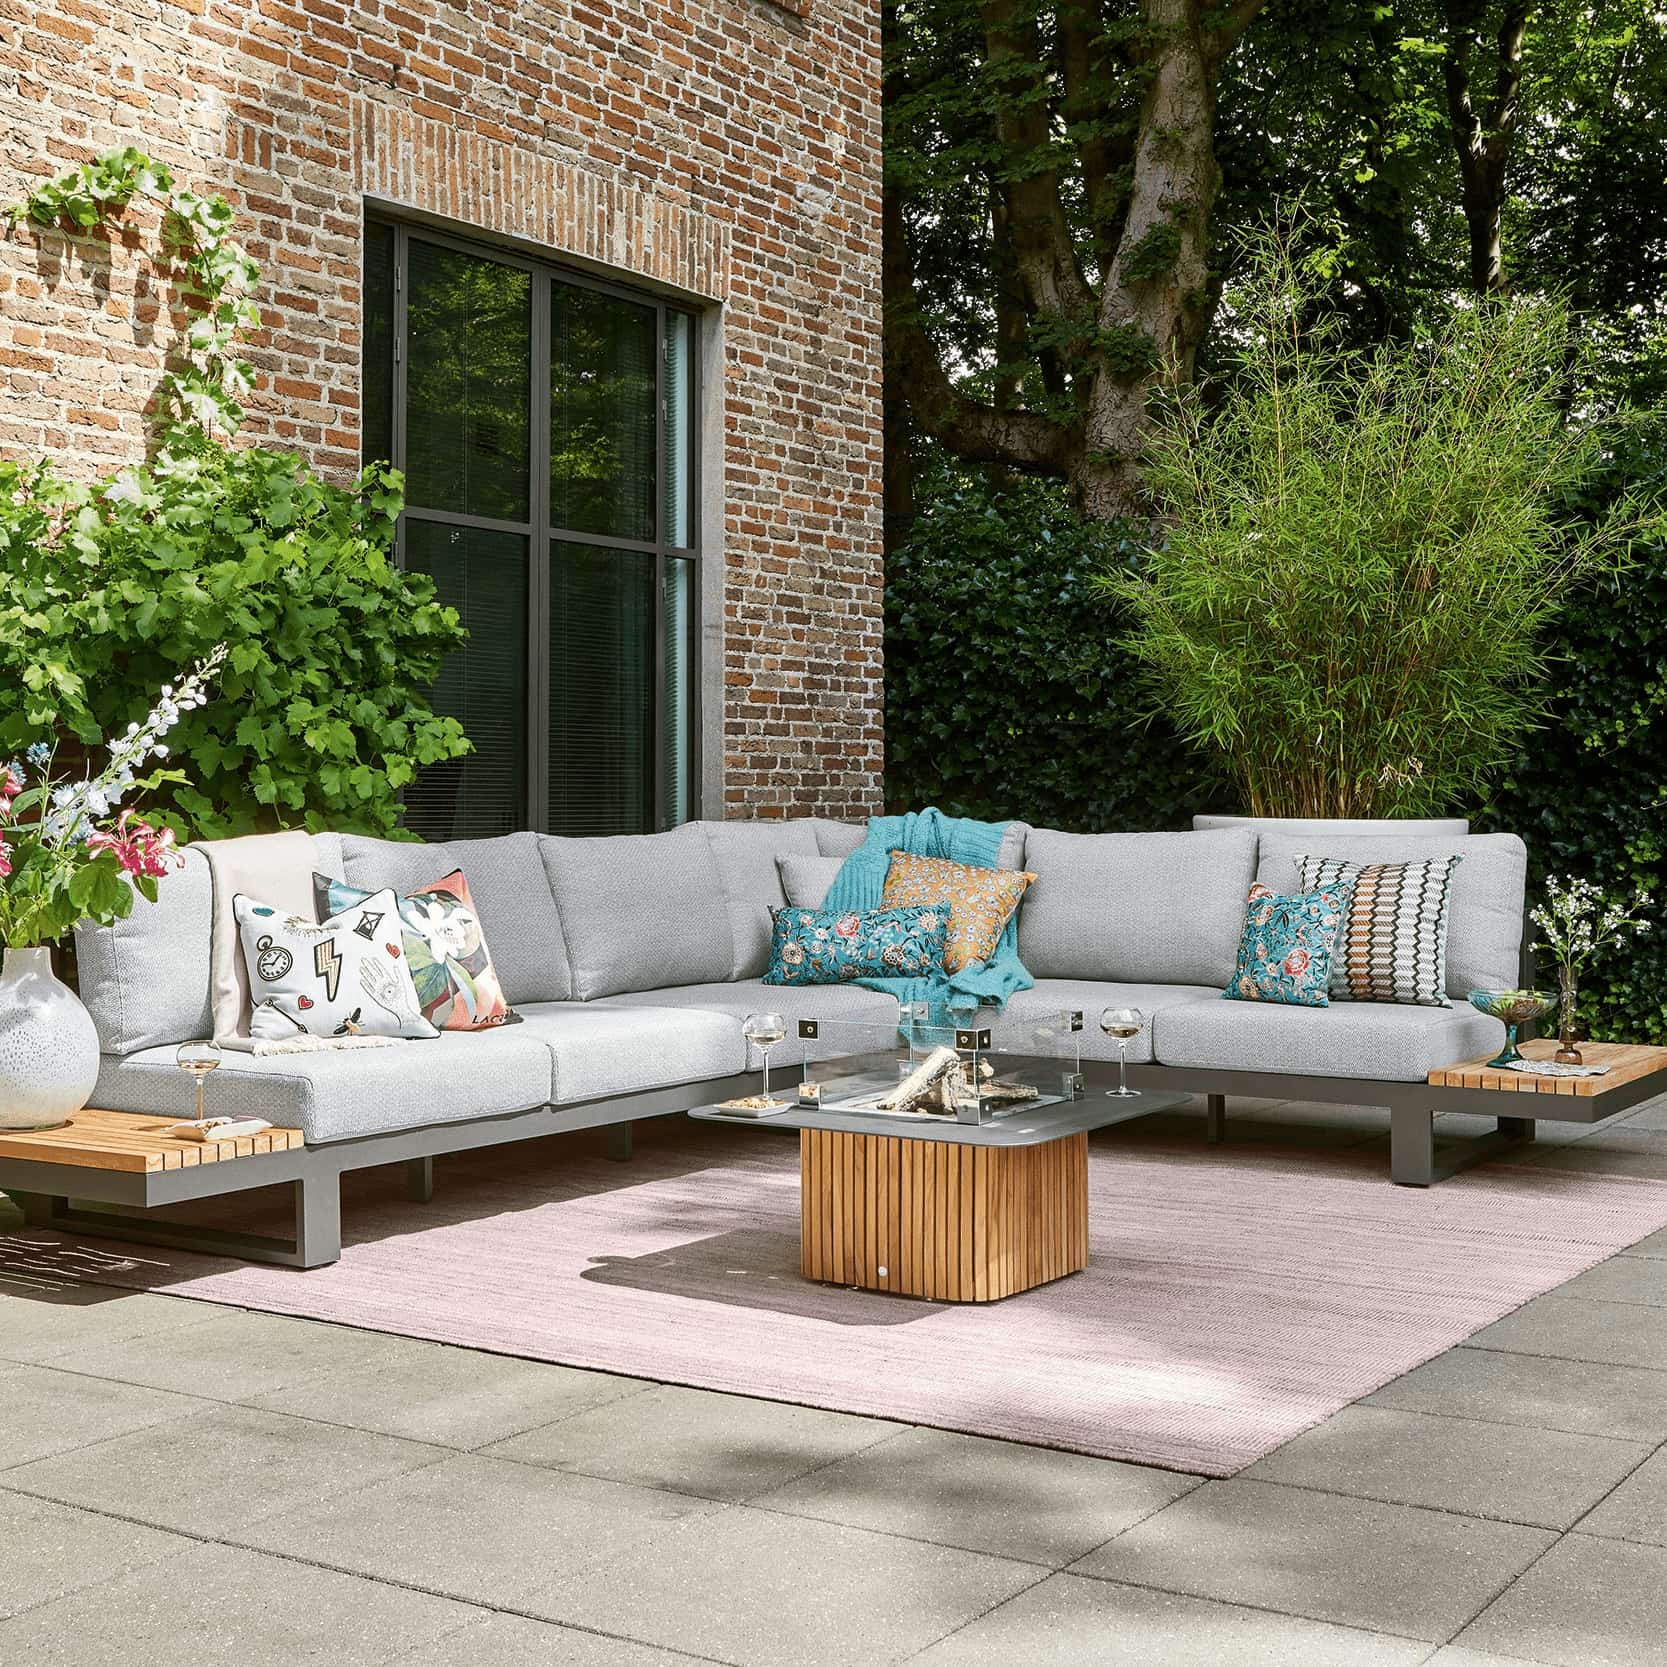 Savona Lounge Collection from Suns Lifestyle